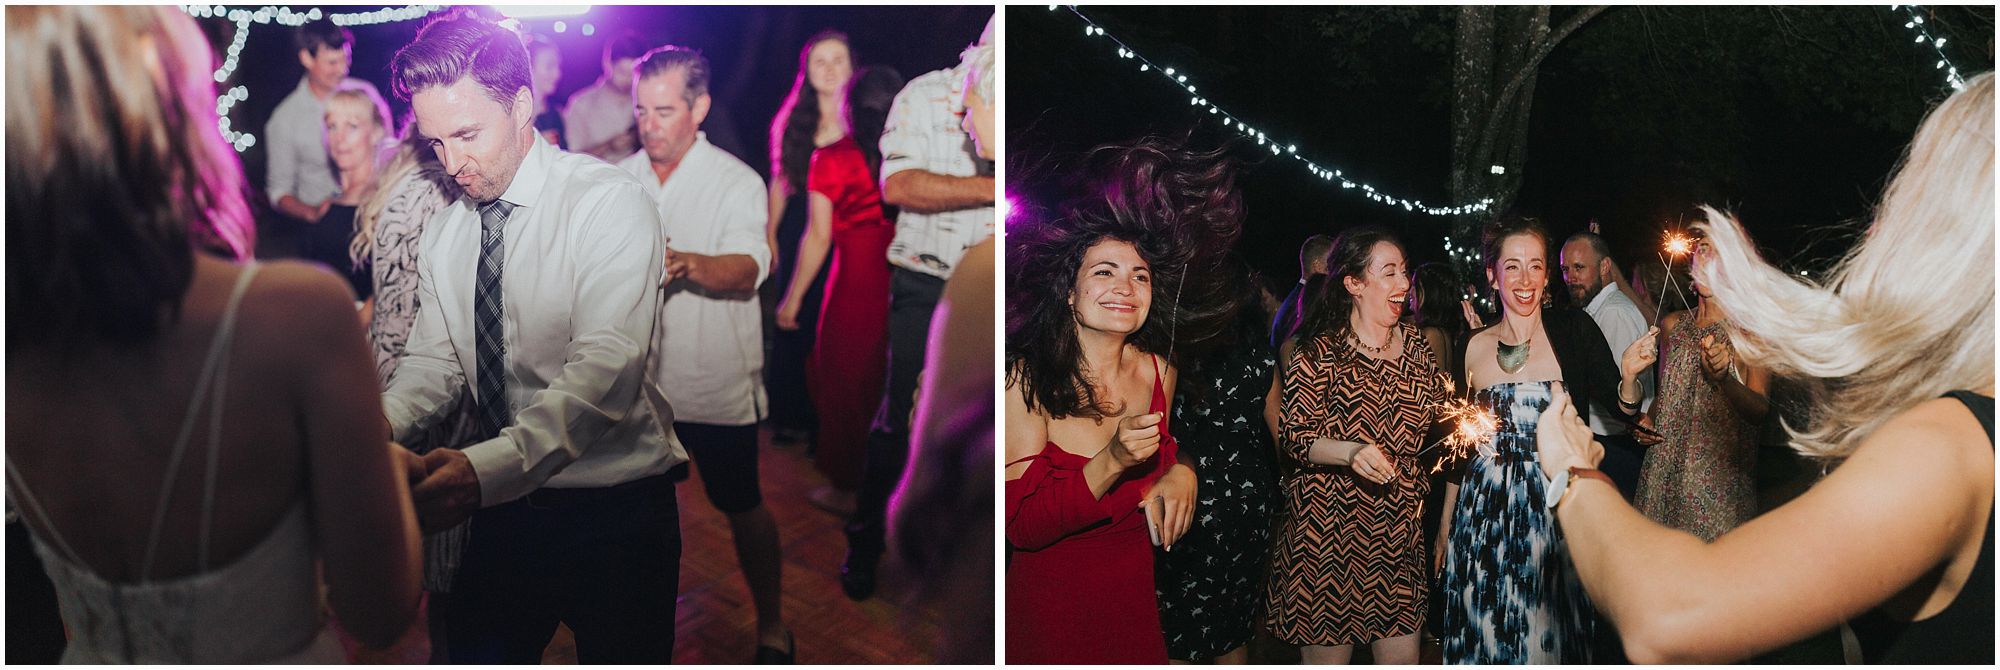 wedding guests having a good time dancing